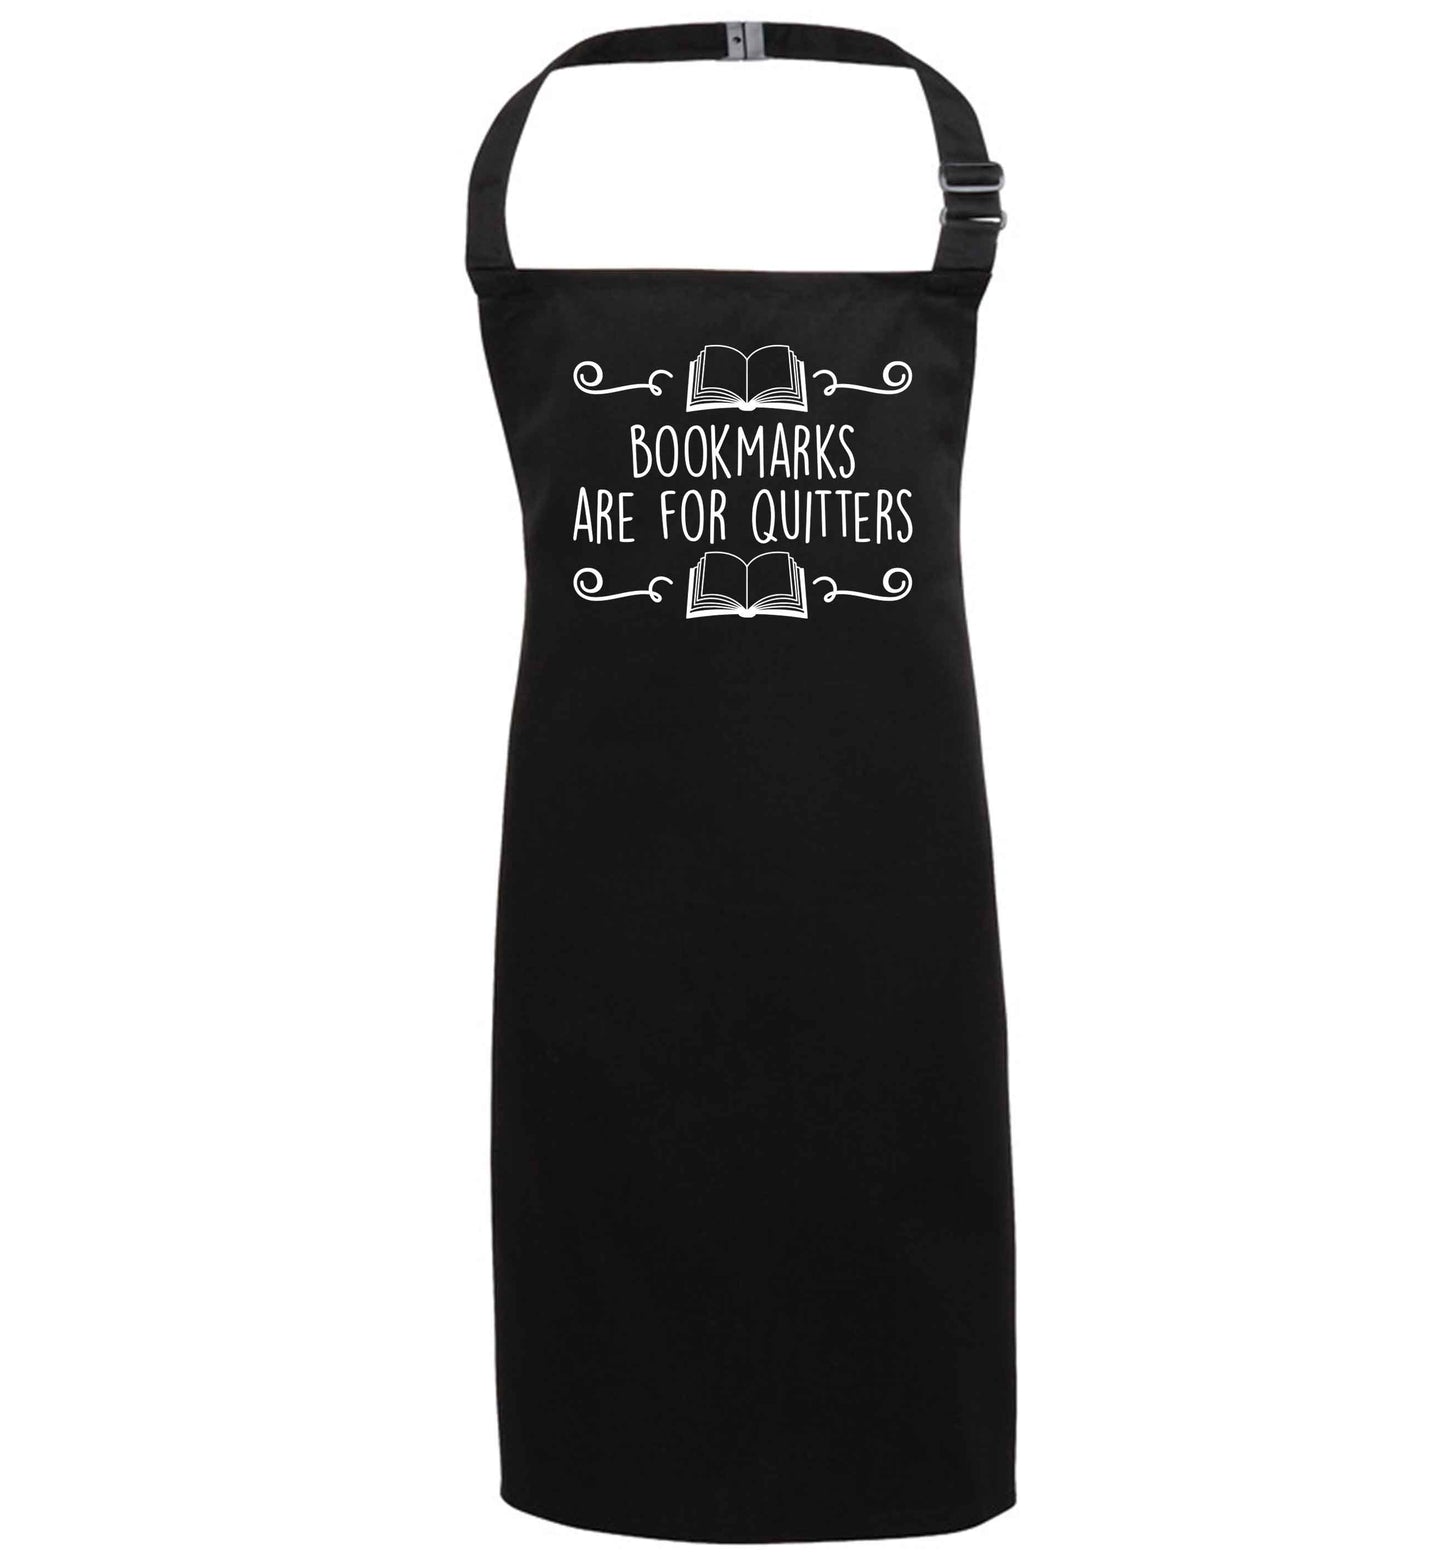 Bookmarks are for quitters black apron 7-10 years